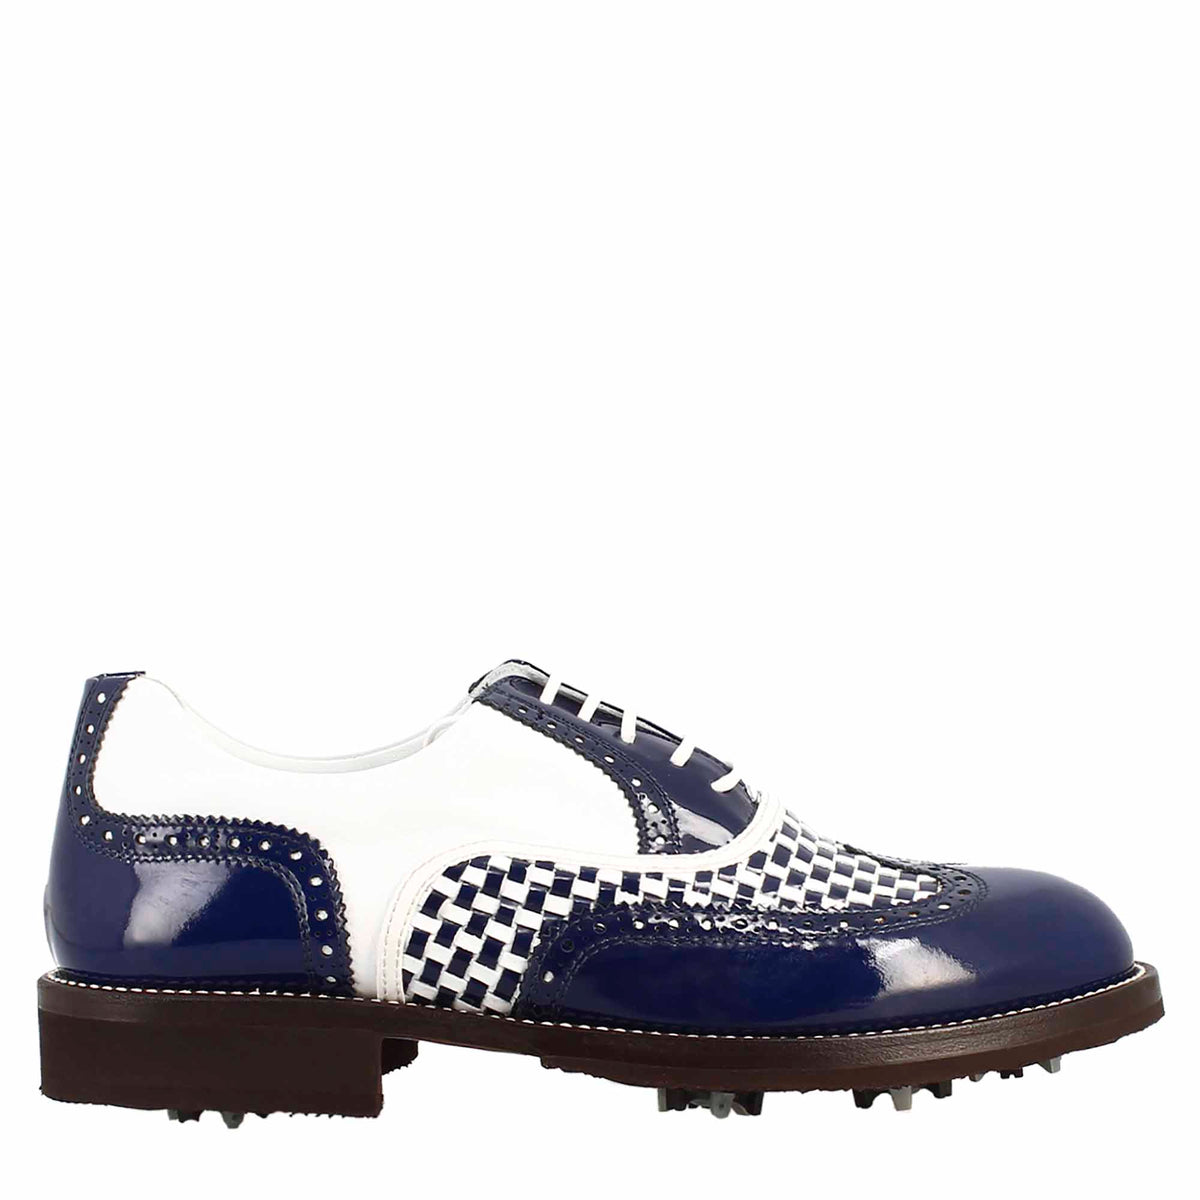 Men's blue and white brogue details handcrafted leather golf shoes